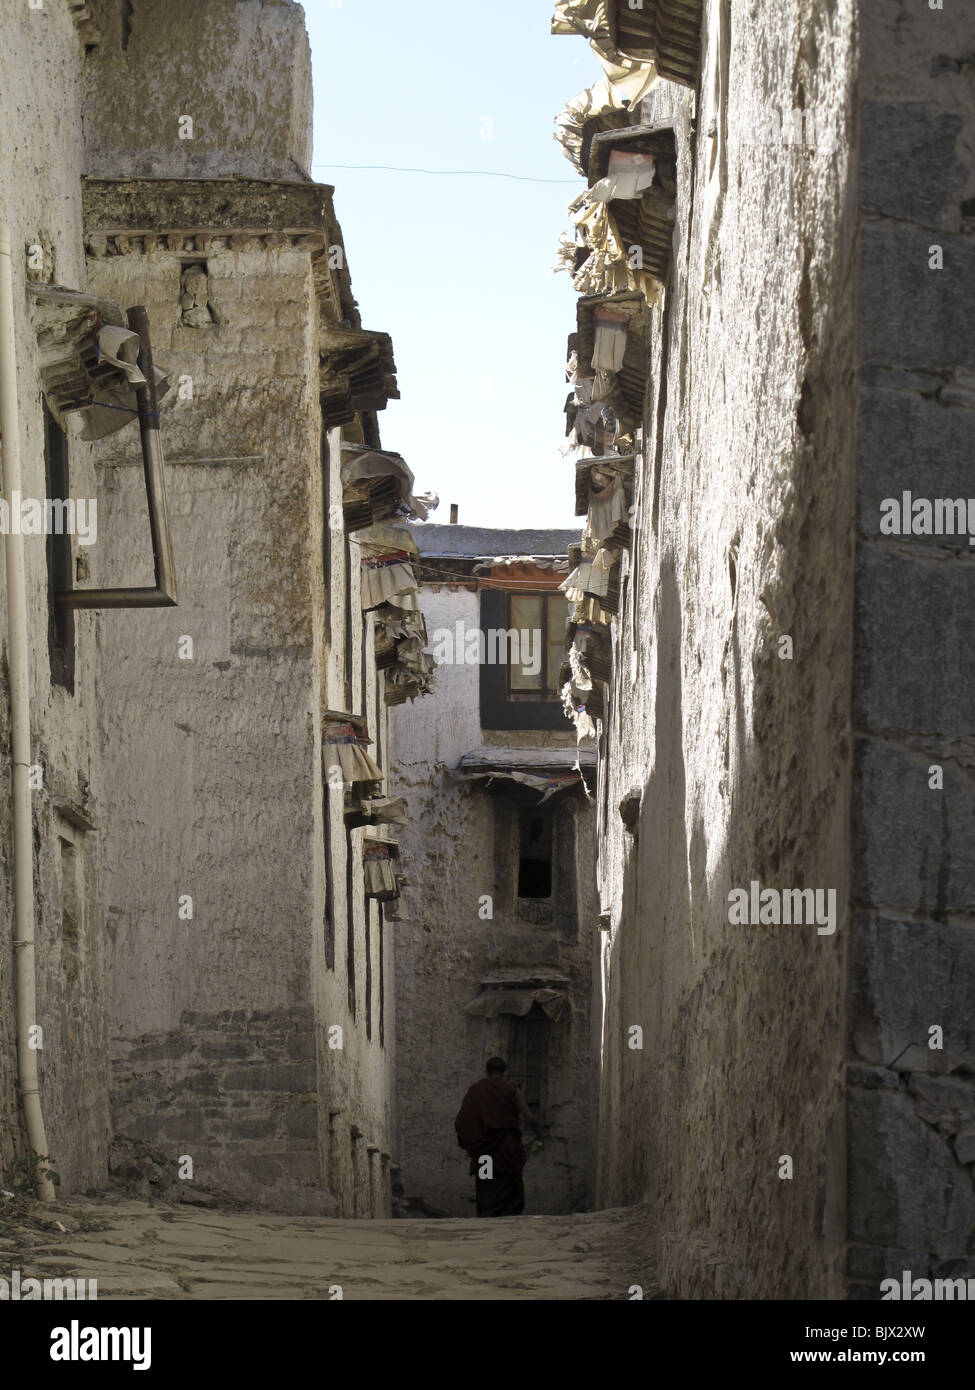 A Buddhist monk walks down the alley between two buildings at the Drepung Monastery in Lhasa, Tibet Stock Photo